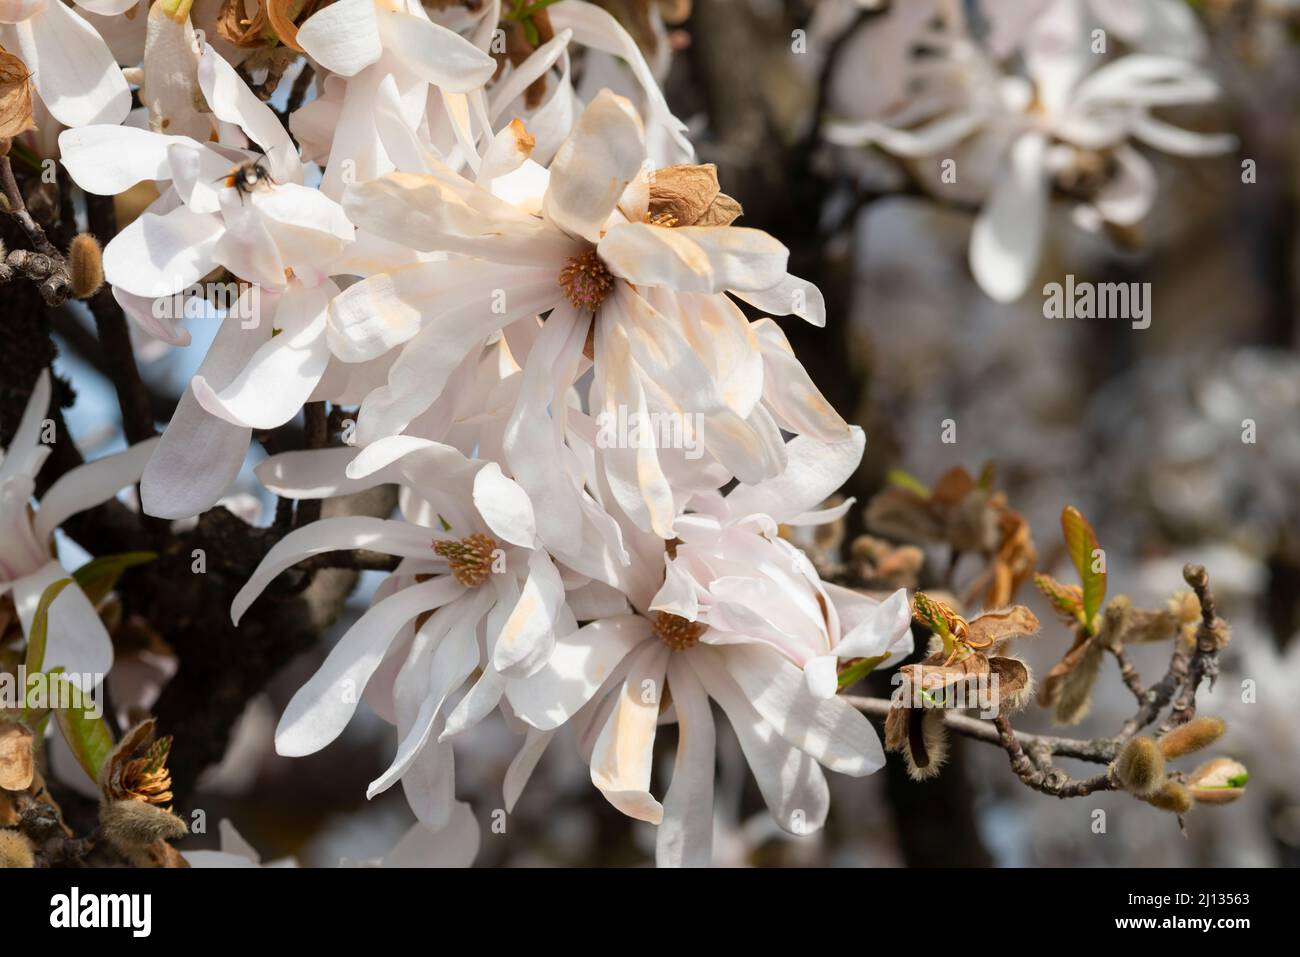 Italy, Lombardy, Garden, Star Magnolia, Magnolia Stellata, Blooming Branches Stock Photo